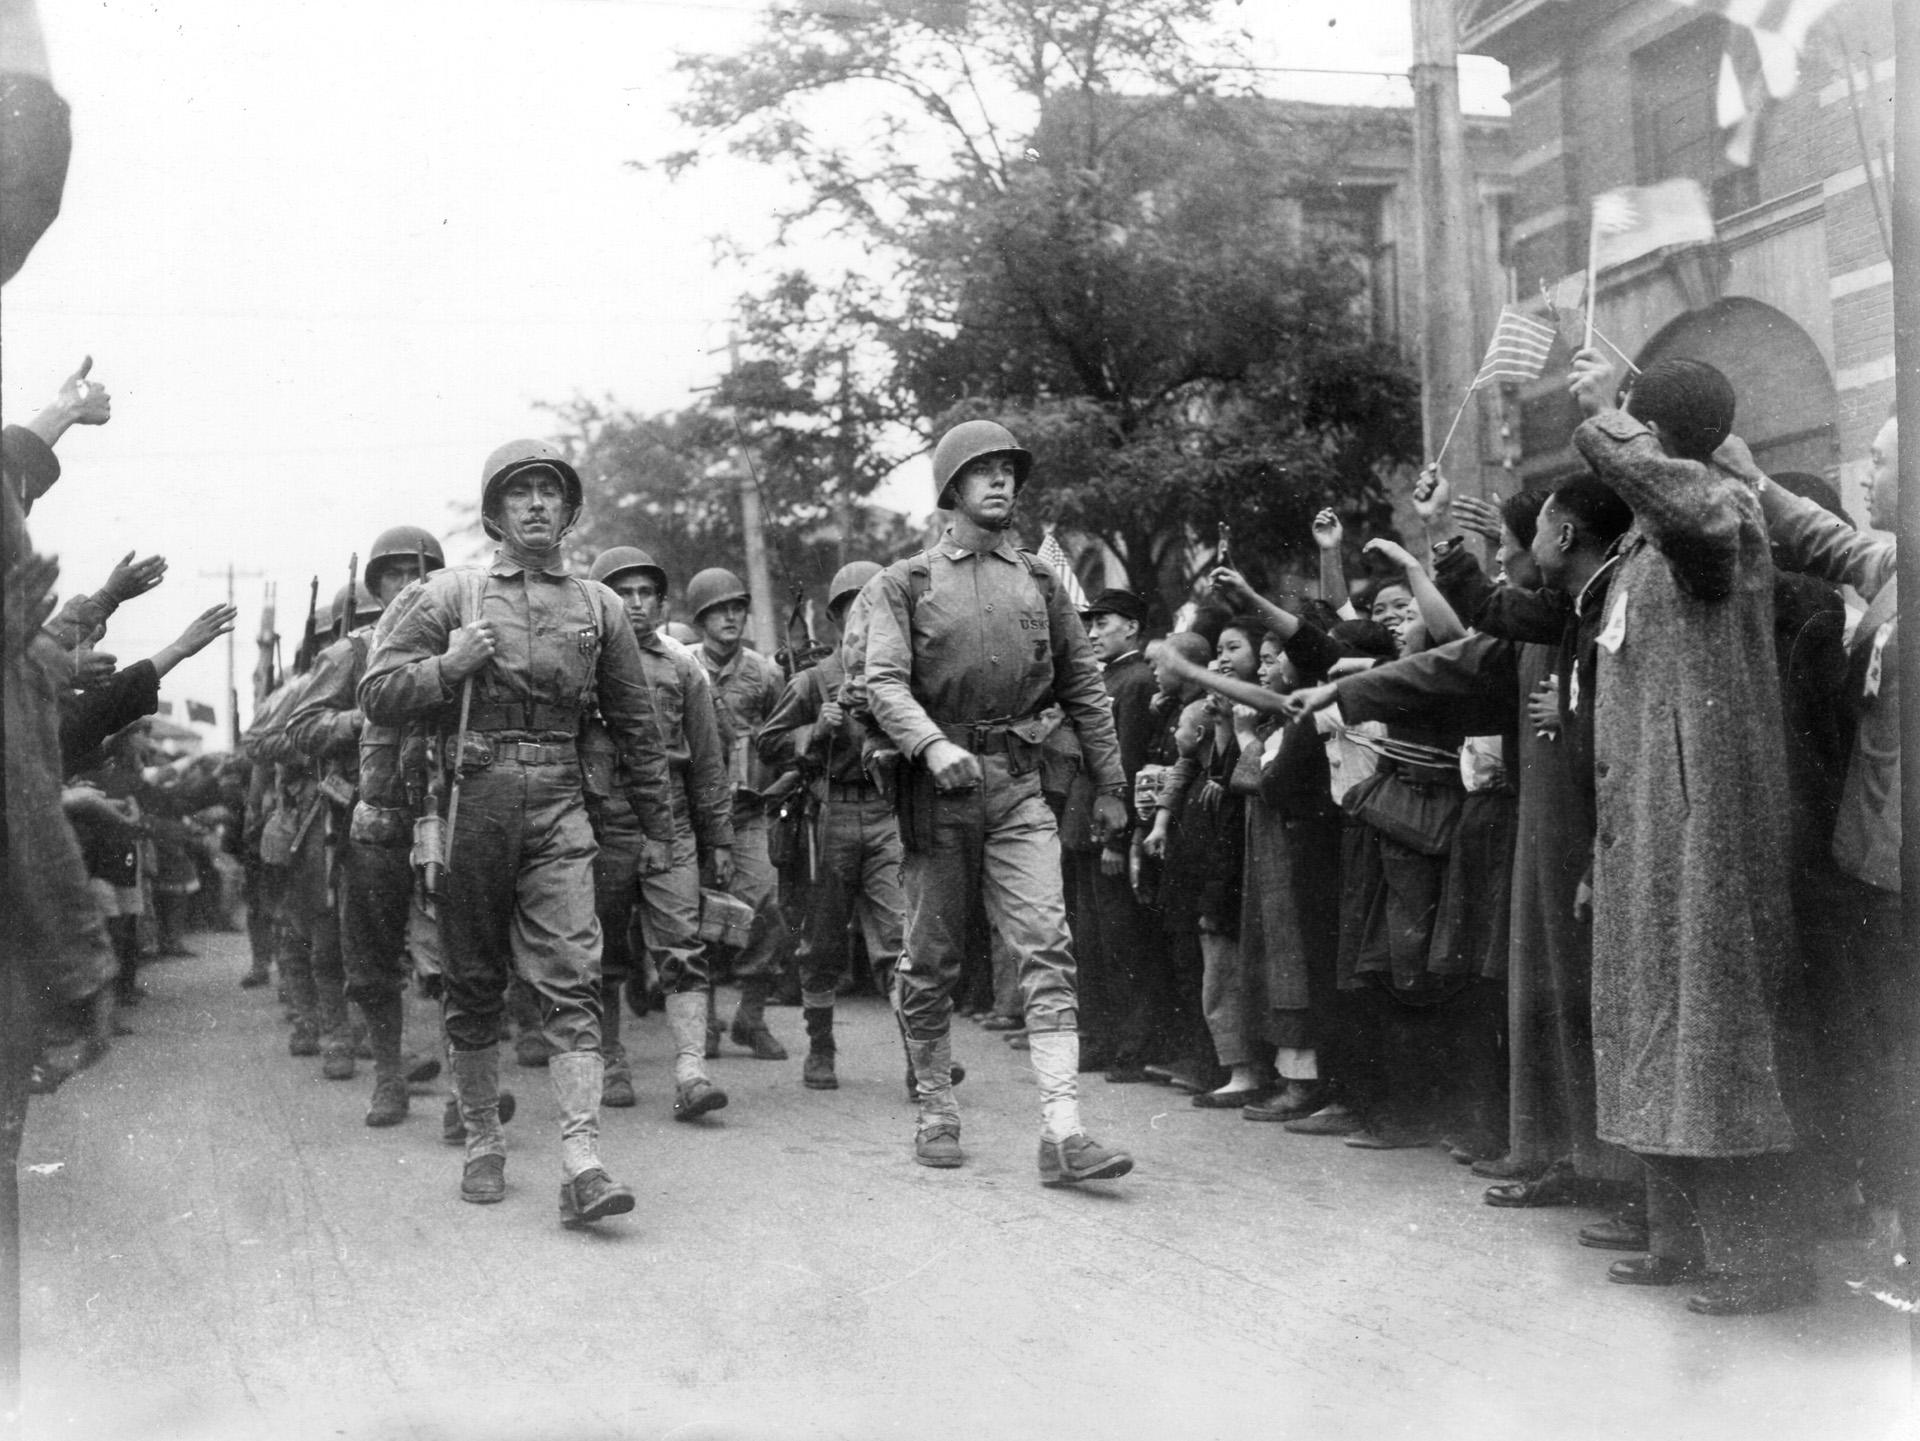 In October 1945, a few weeks after the formal surrender of Japan in Tokyo Bay on September 2, American Marines march into the Chinese city of Tientsin. 